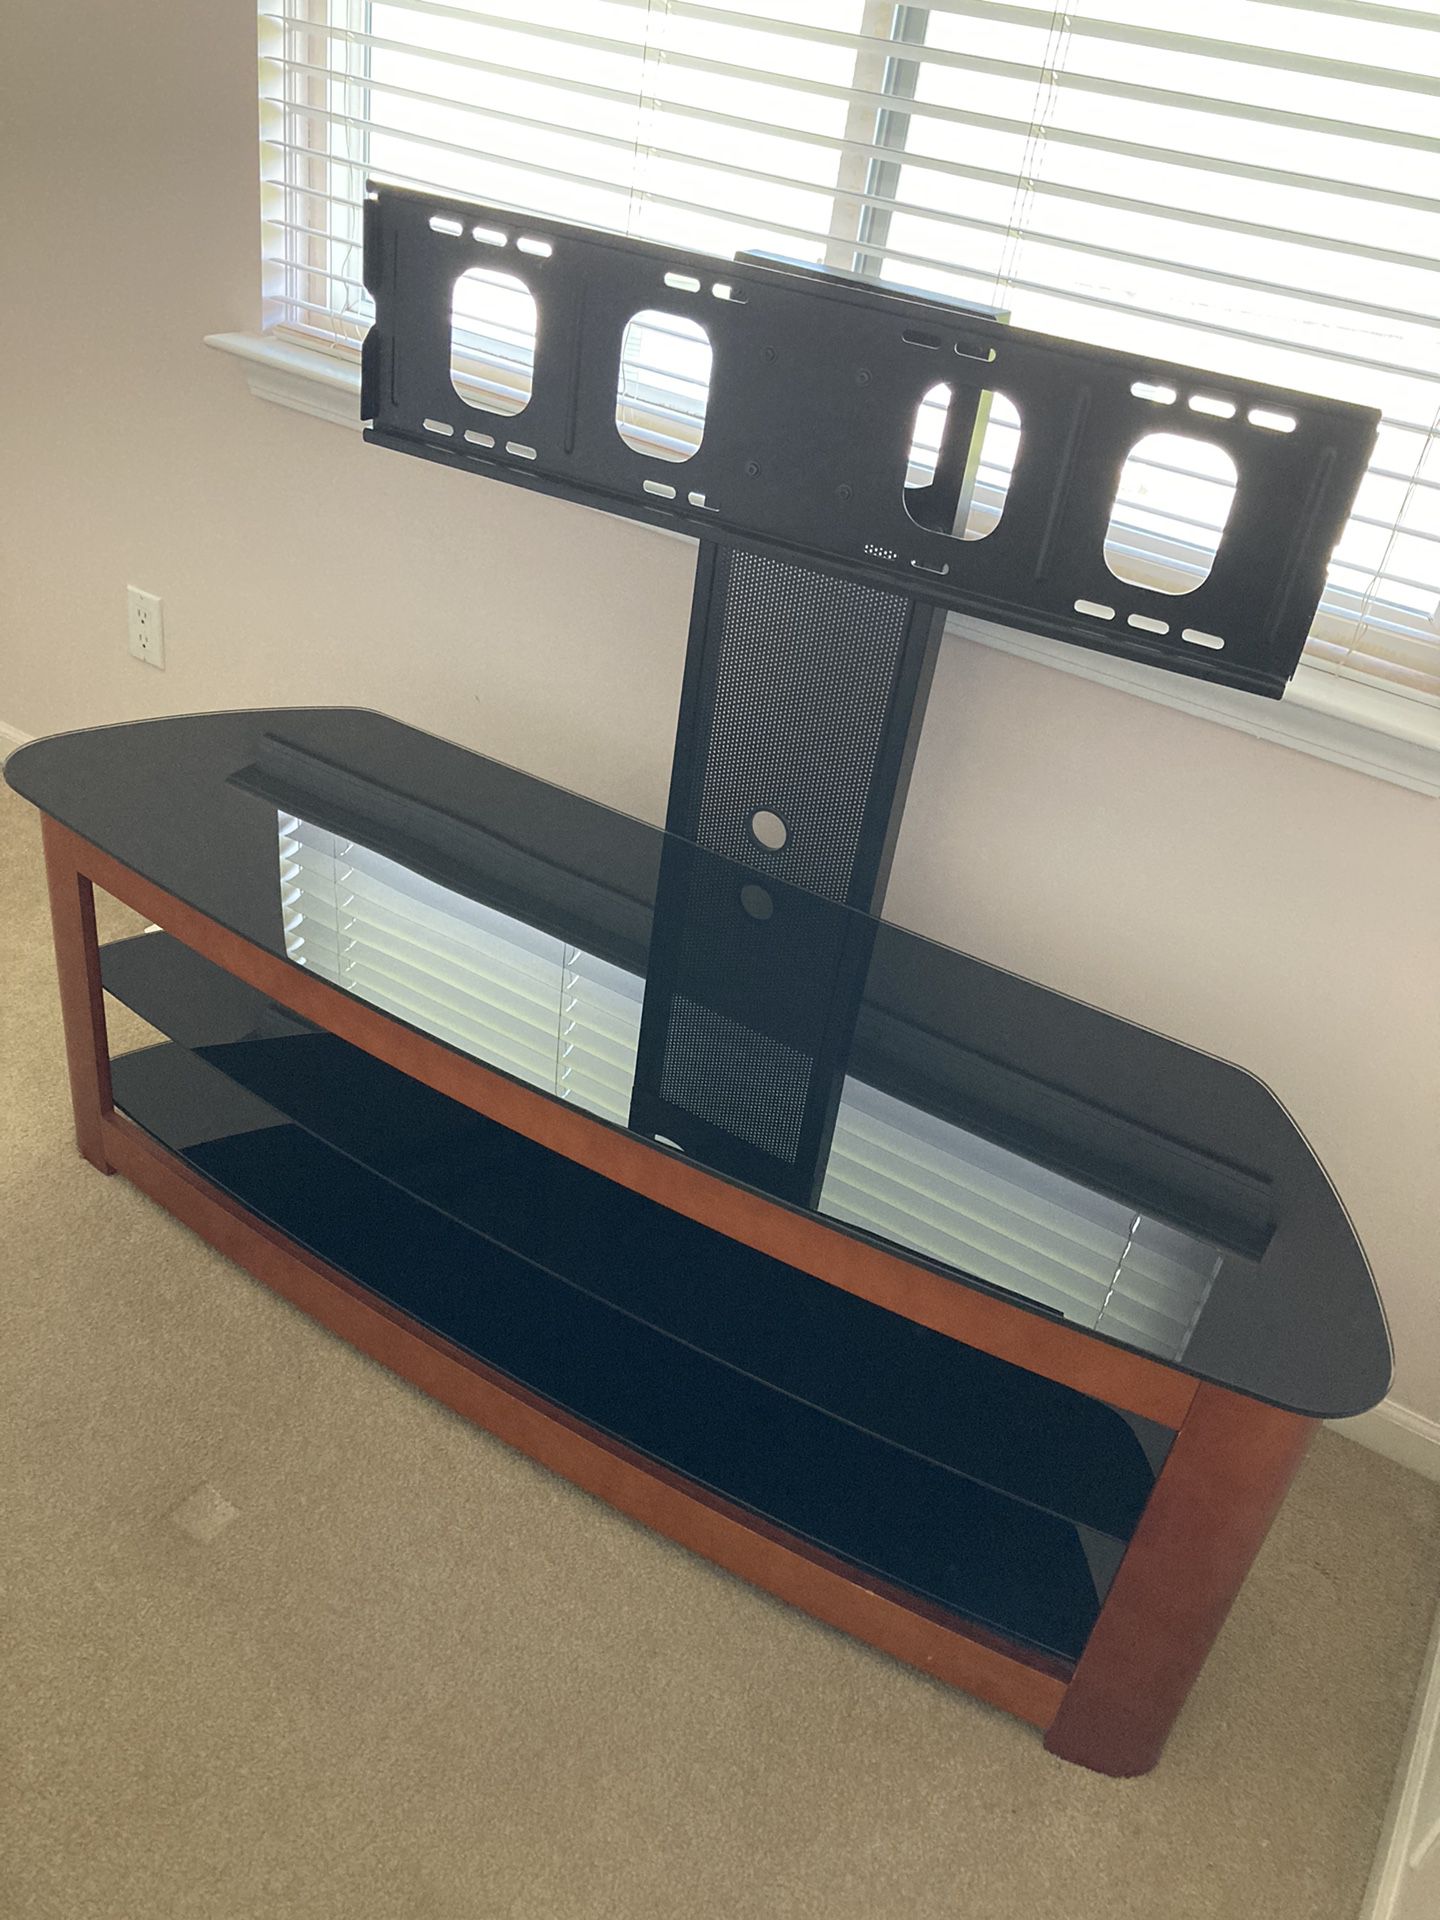 Mount Swivel TV Stand with Glass Shelves (obo). 